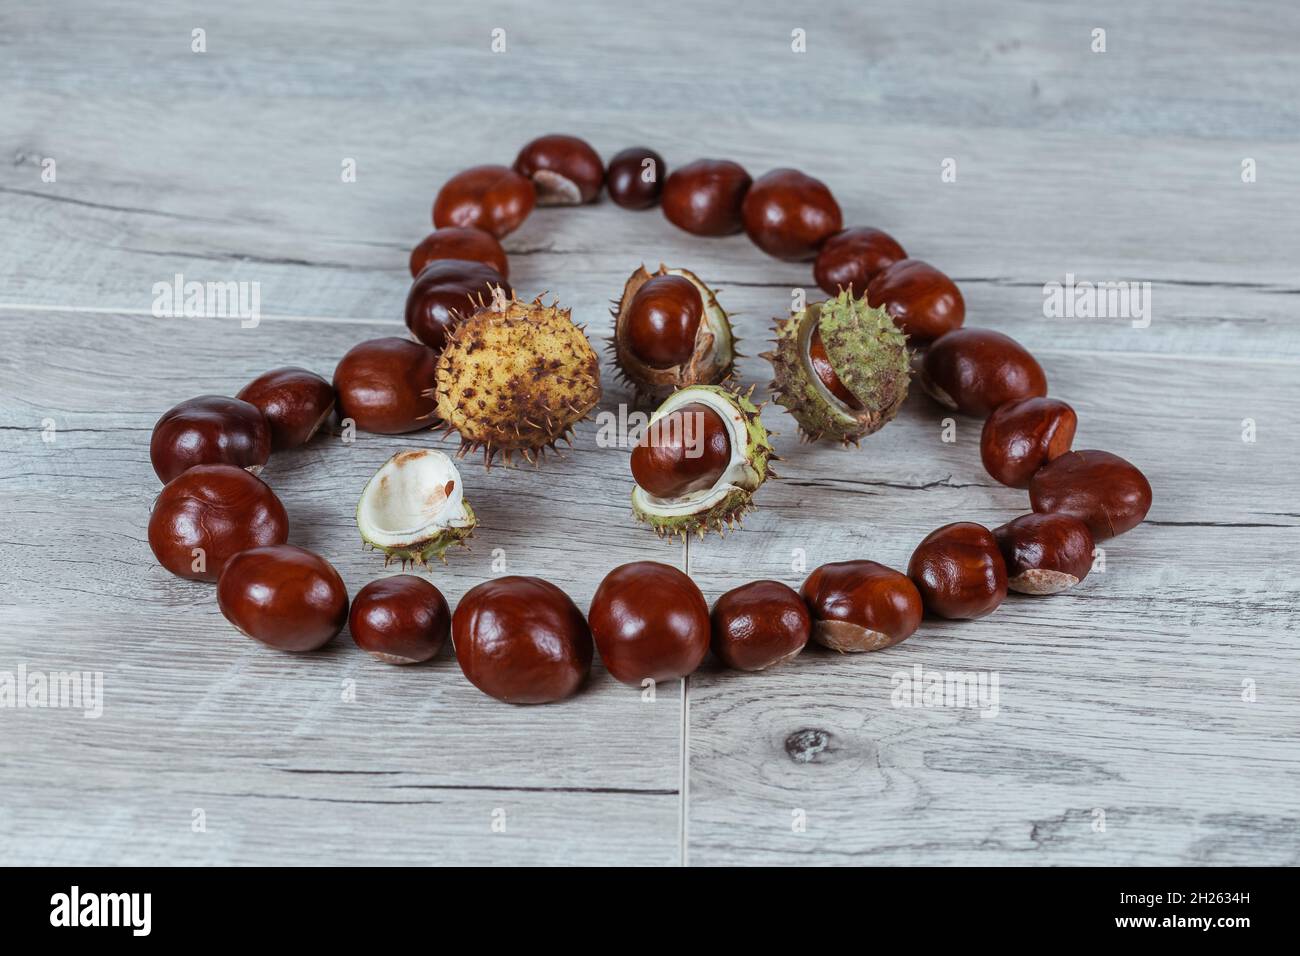 Chestnuts in a heart shape on a wooden background. Stock Photo